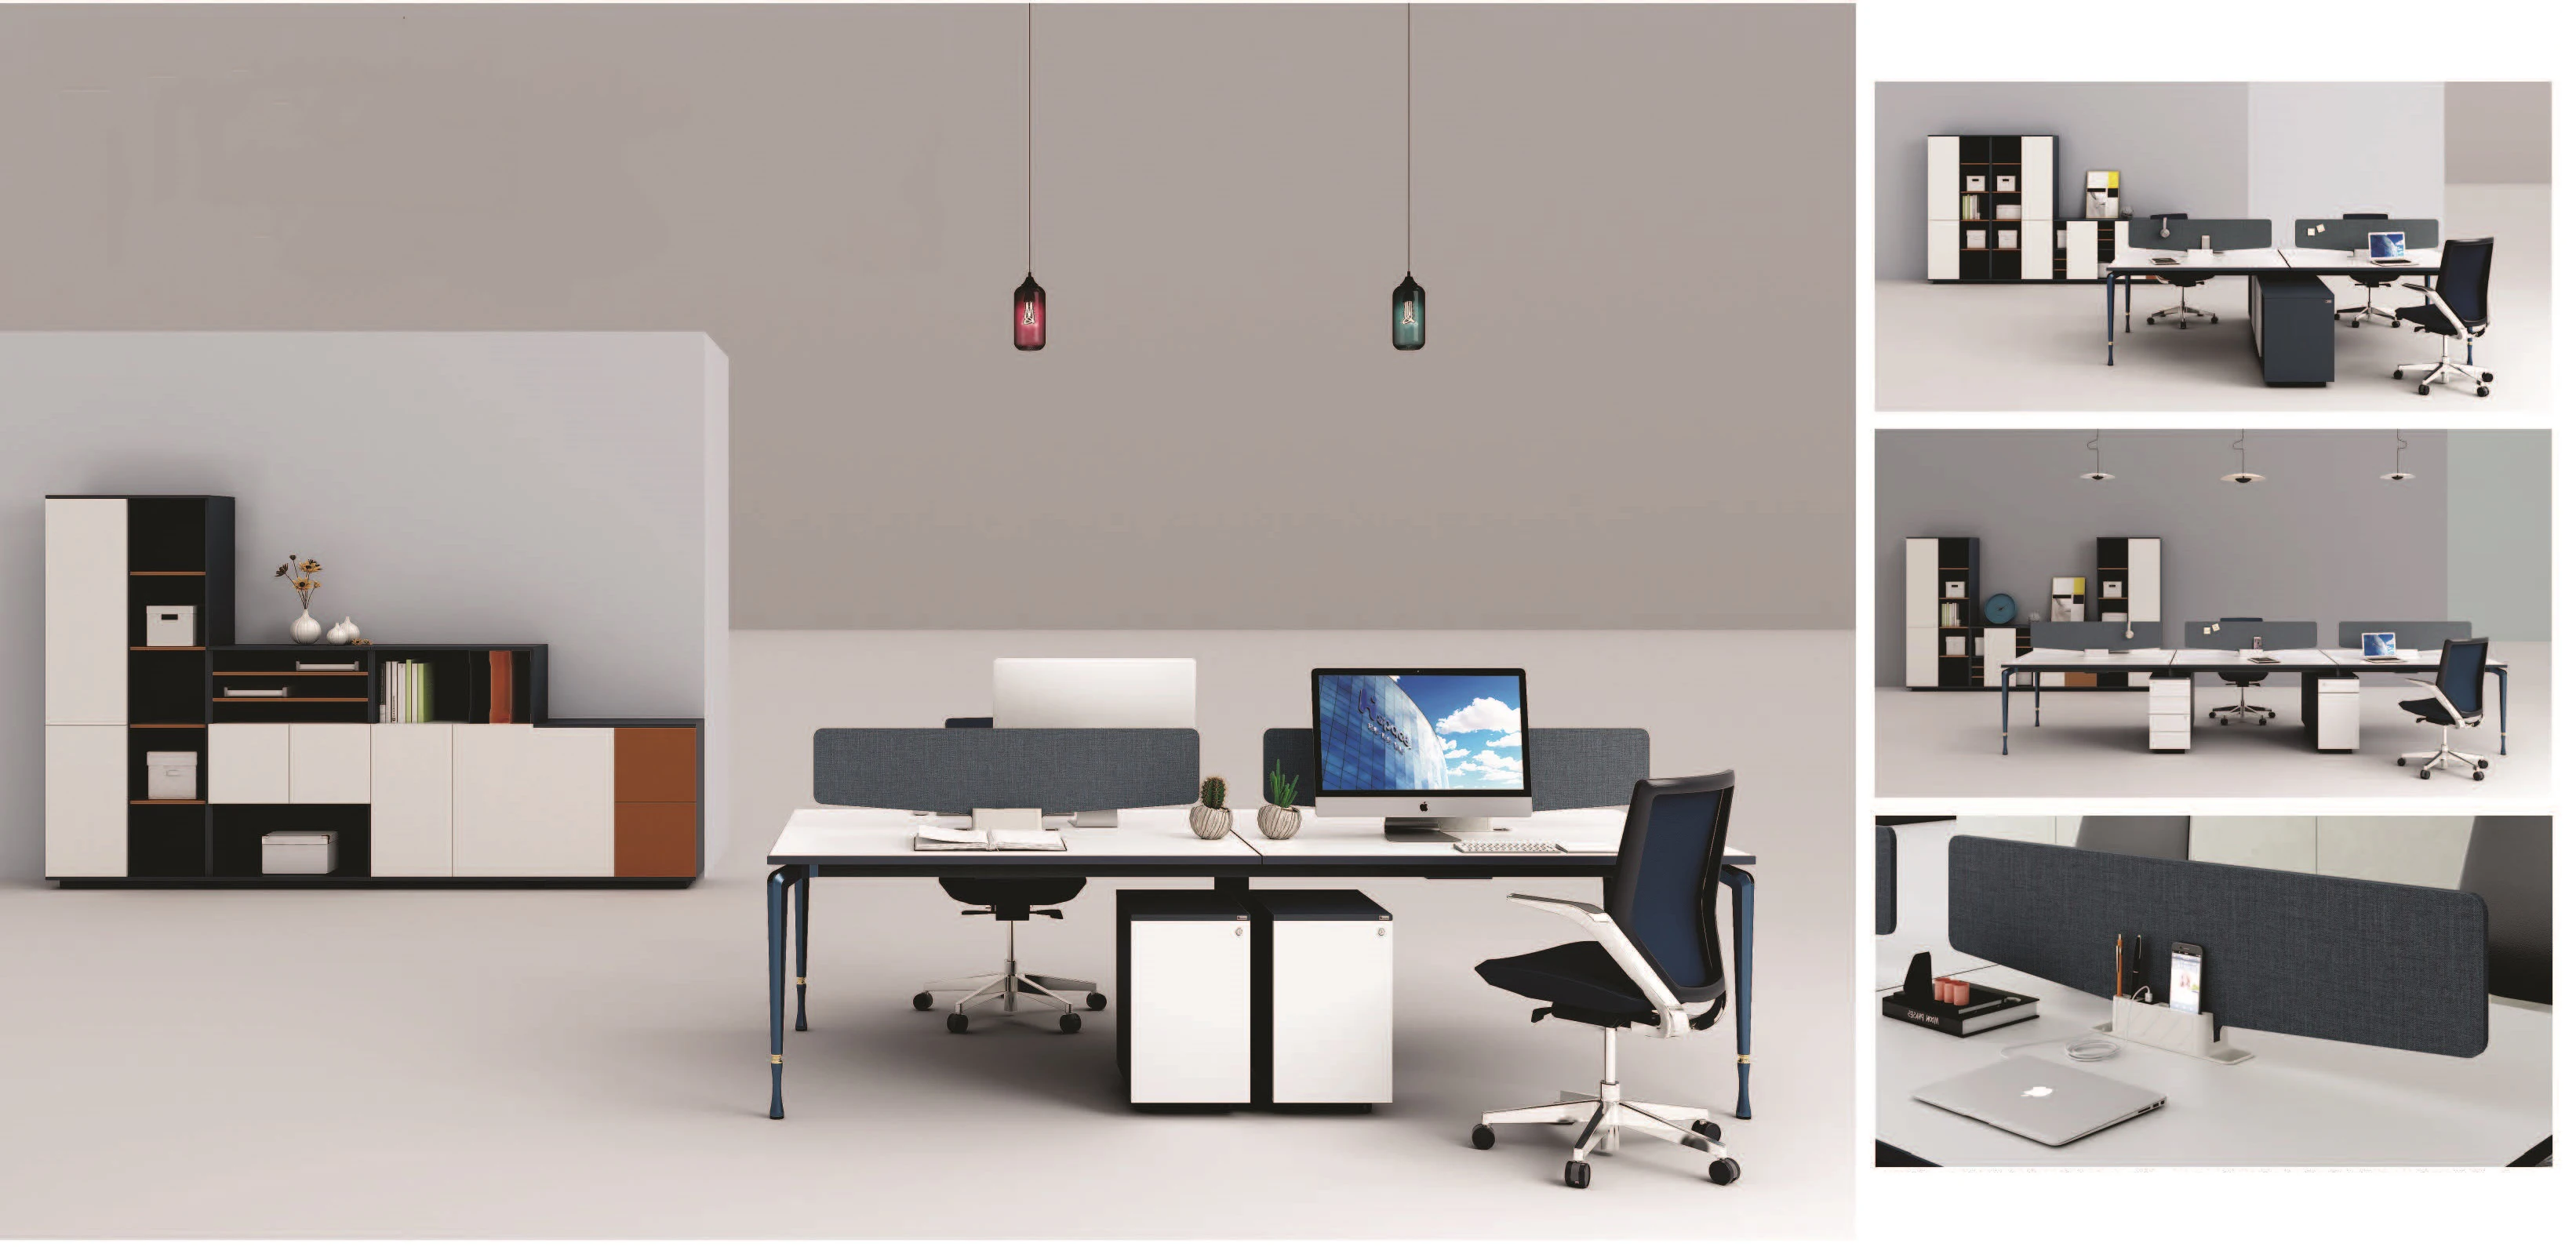 Office Furniture Spain,Doctor Office Modular Furniture - Buy Office  Furniture Spain,Doctor Office Modular Furniture,Chair Office Furniture  Foshan Product on 